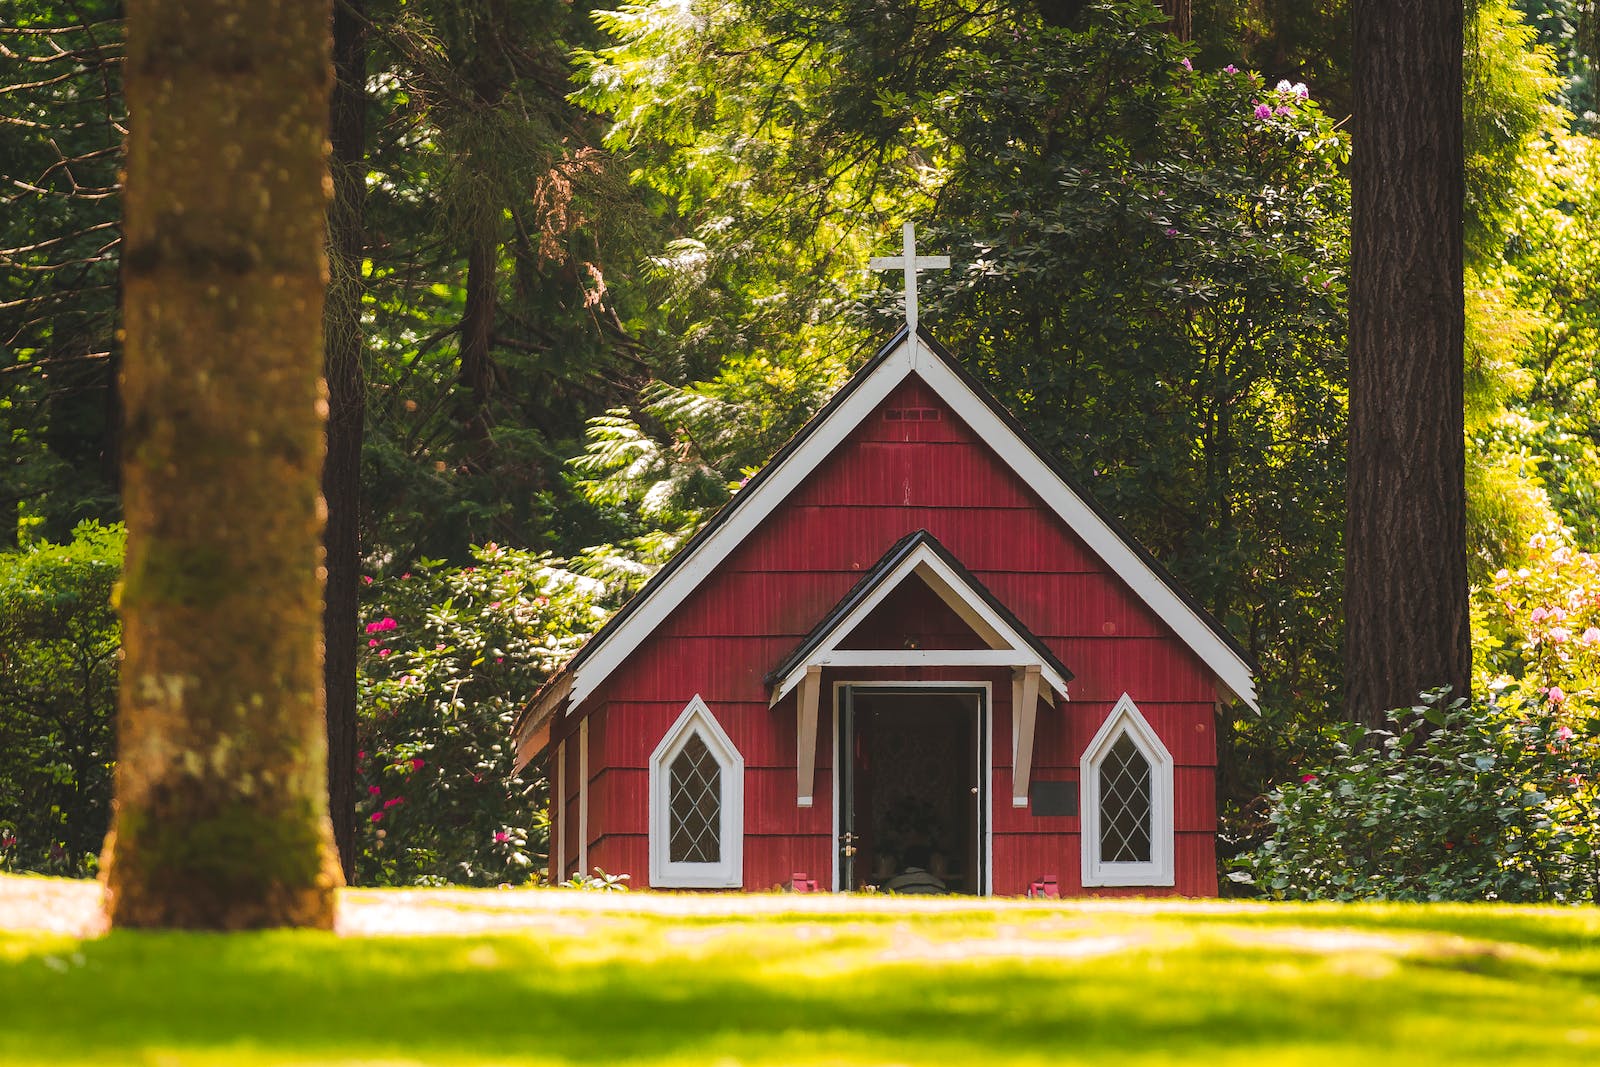 Red Chapel on Grassy Field With Trees